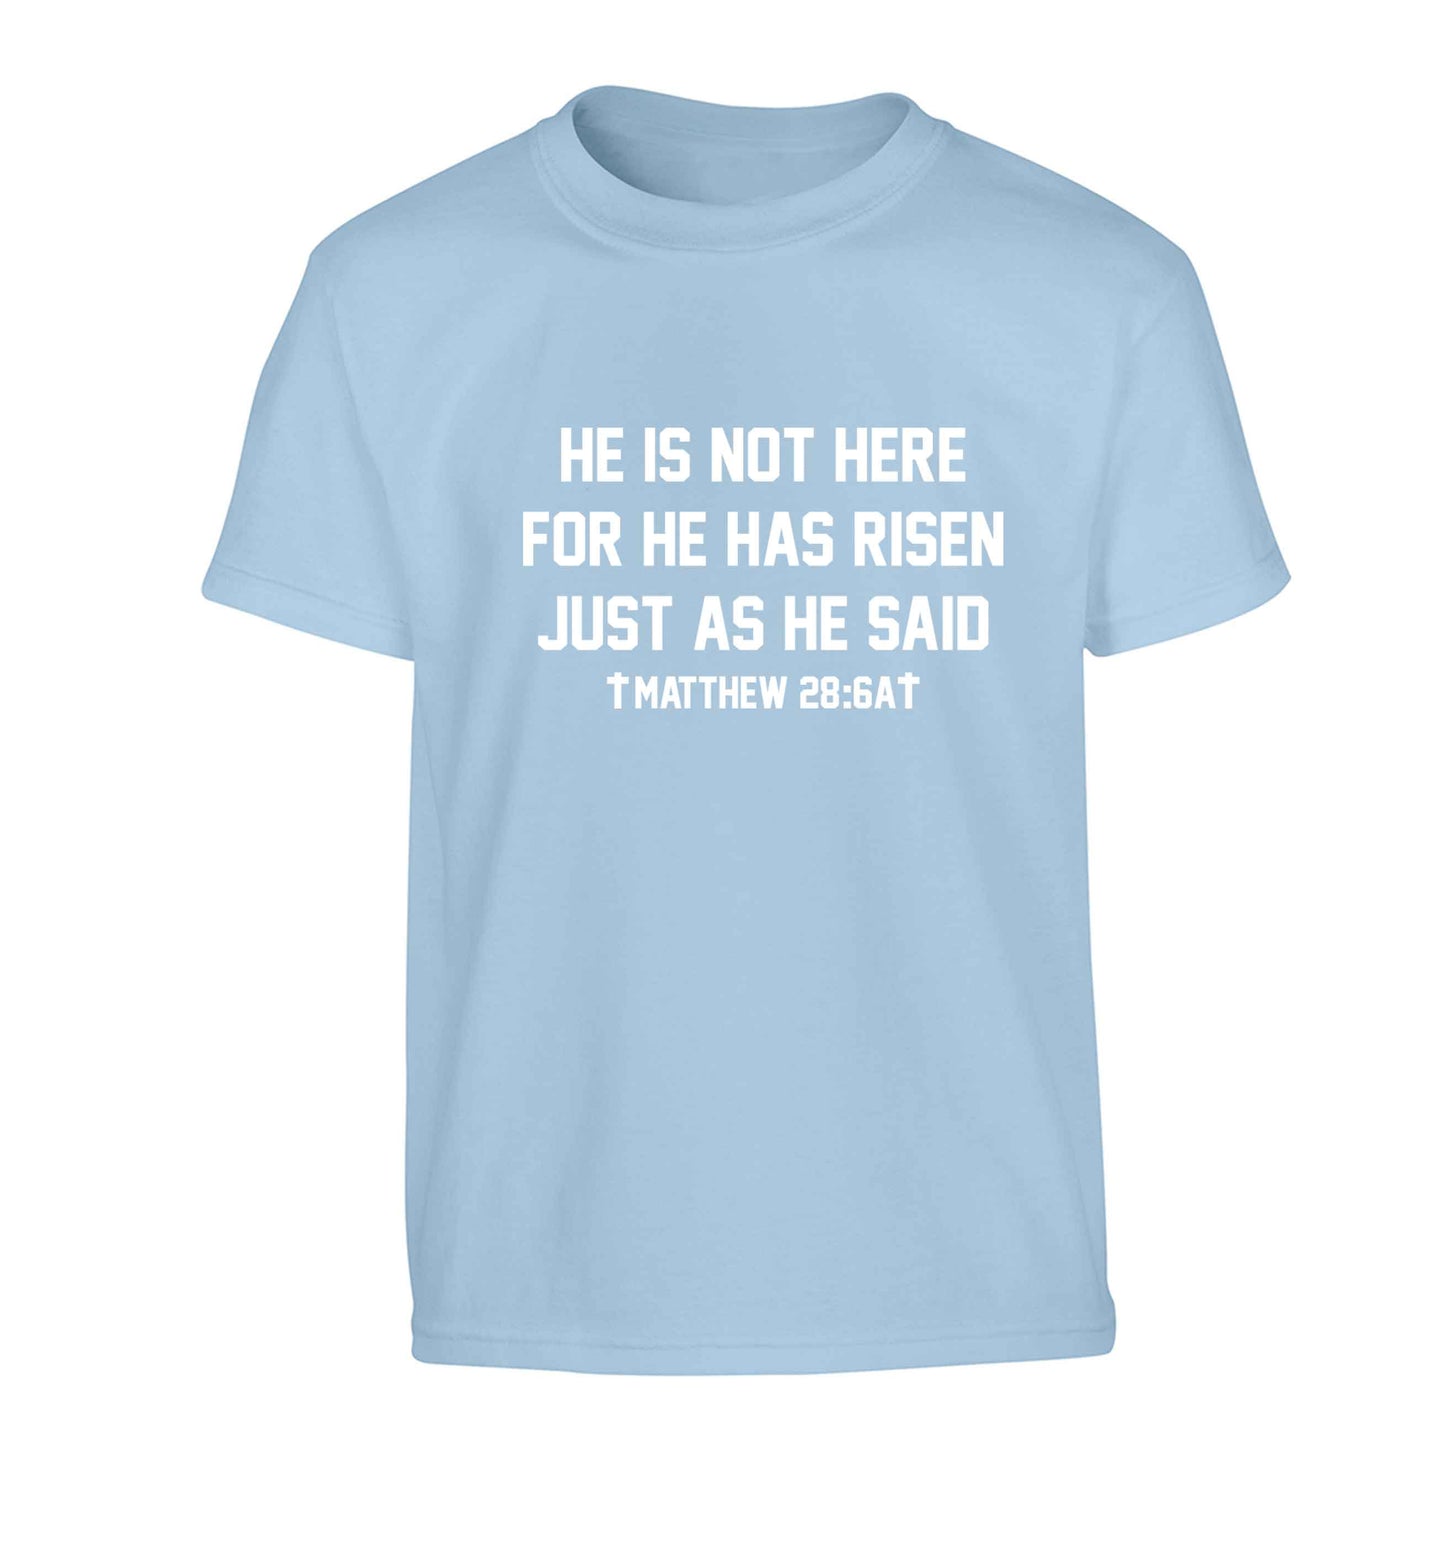 He is not here for he has risen just as he said matthew 28:6A Children's light blue Tshirt 12-13 Years